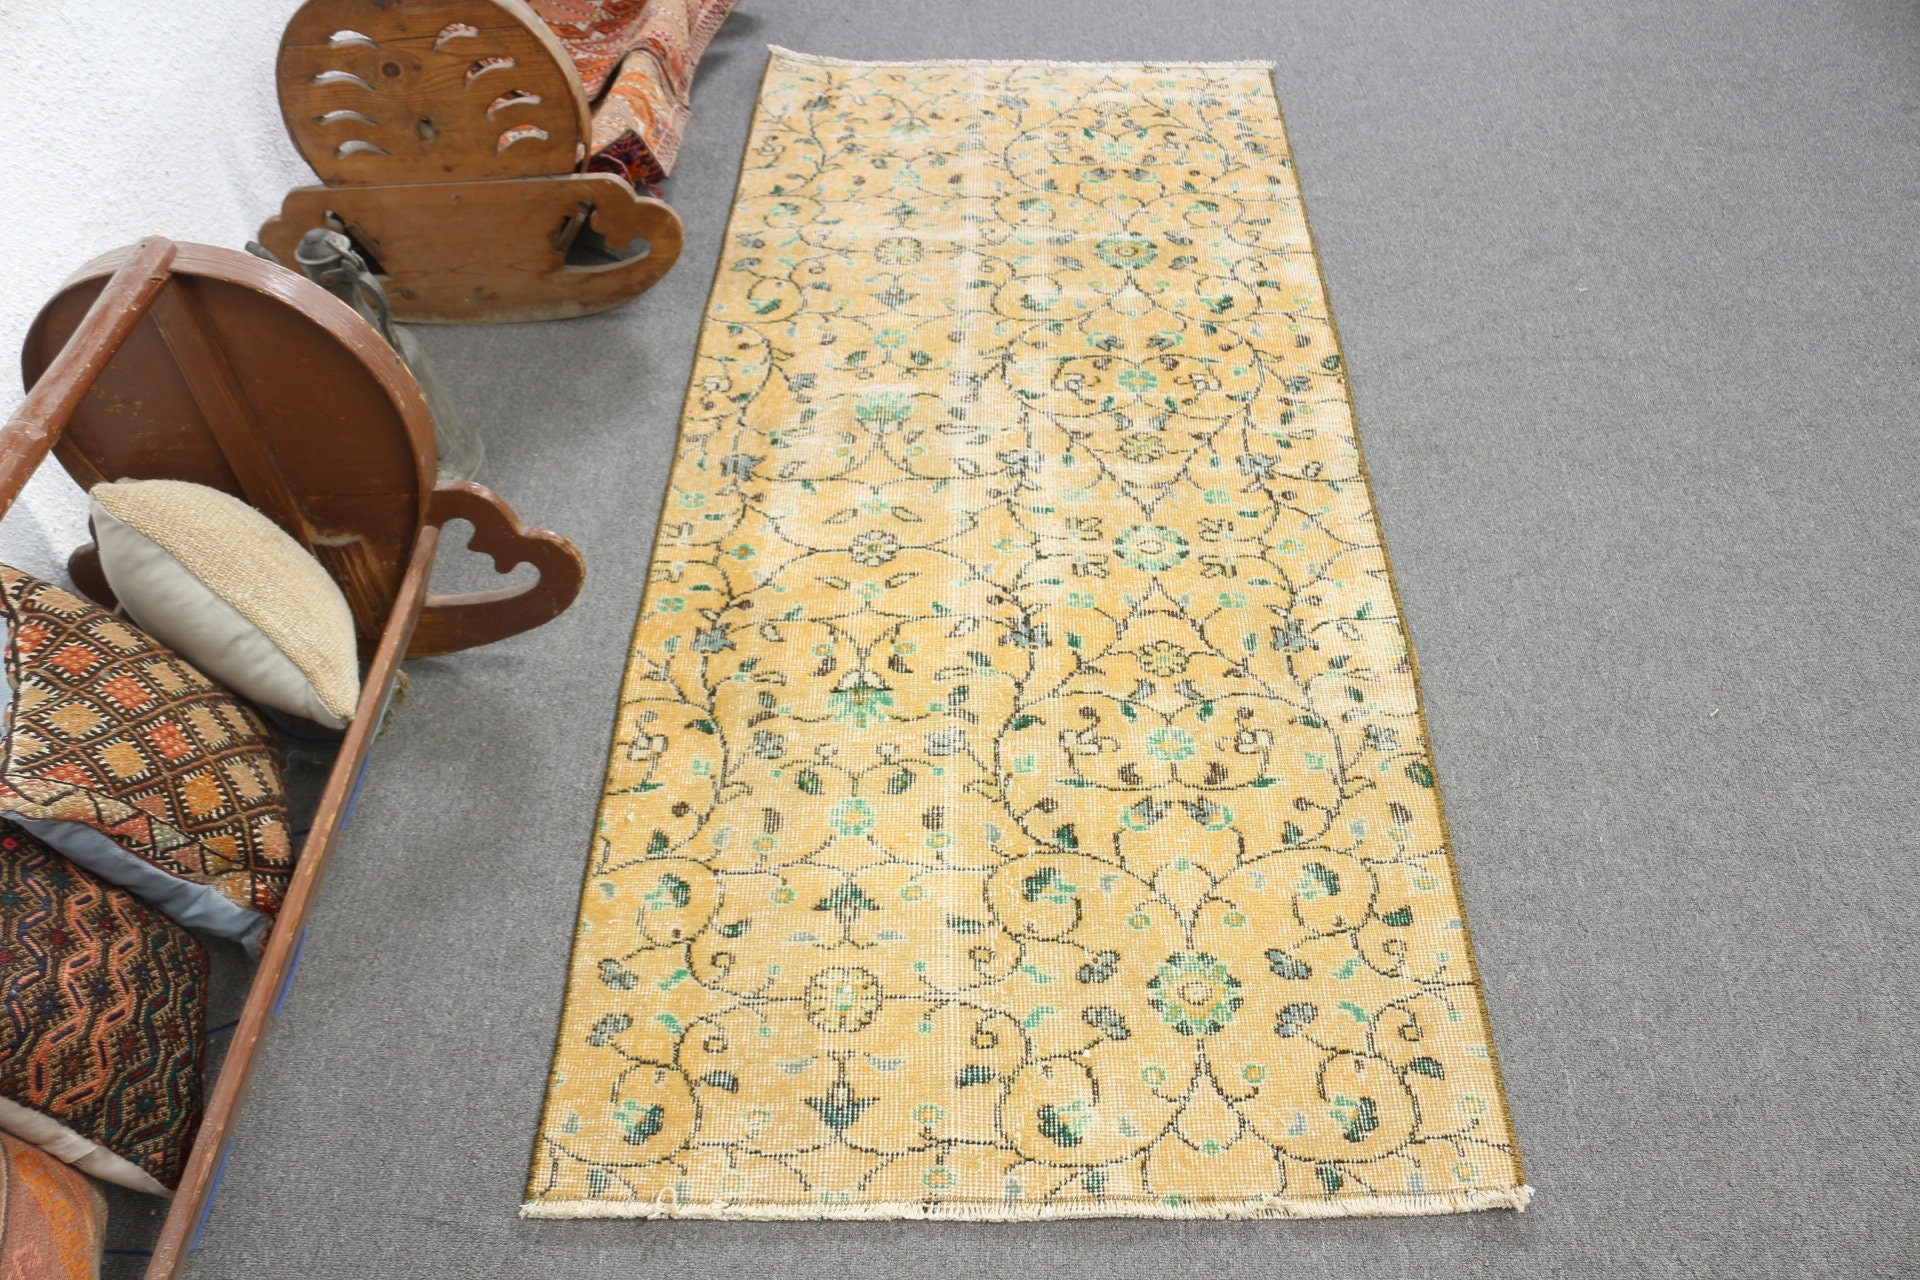 Art Rug, Vintage Rug, Turkish Rugs, Home Decor Rug, 2.8x6.4 ft Accent Rugs, Bedroom Rug, Moroccan Rugs, Kitchen Rugs, Yellow Anatolian Rugs